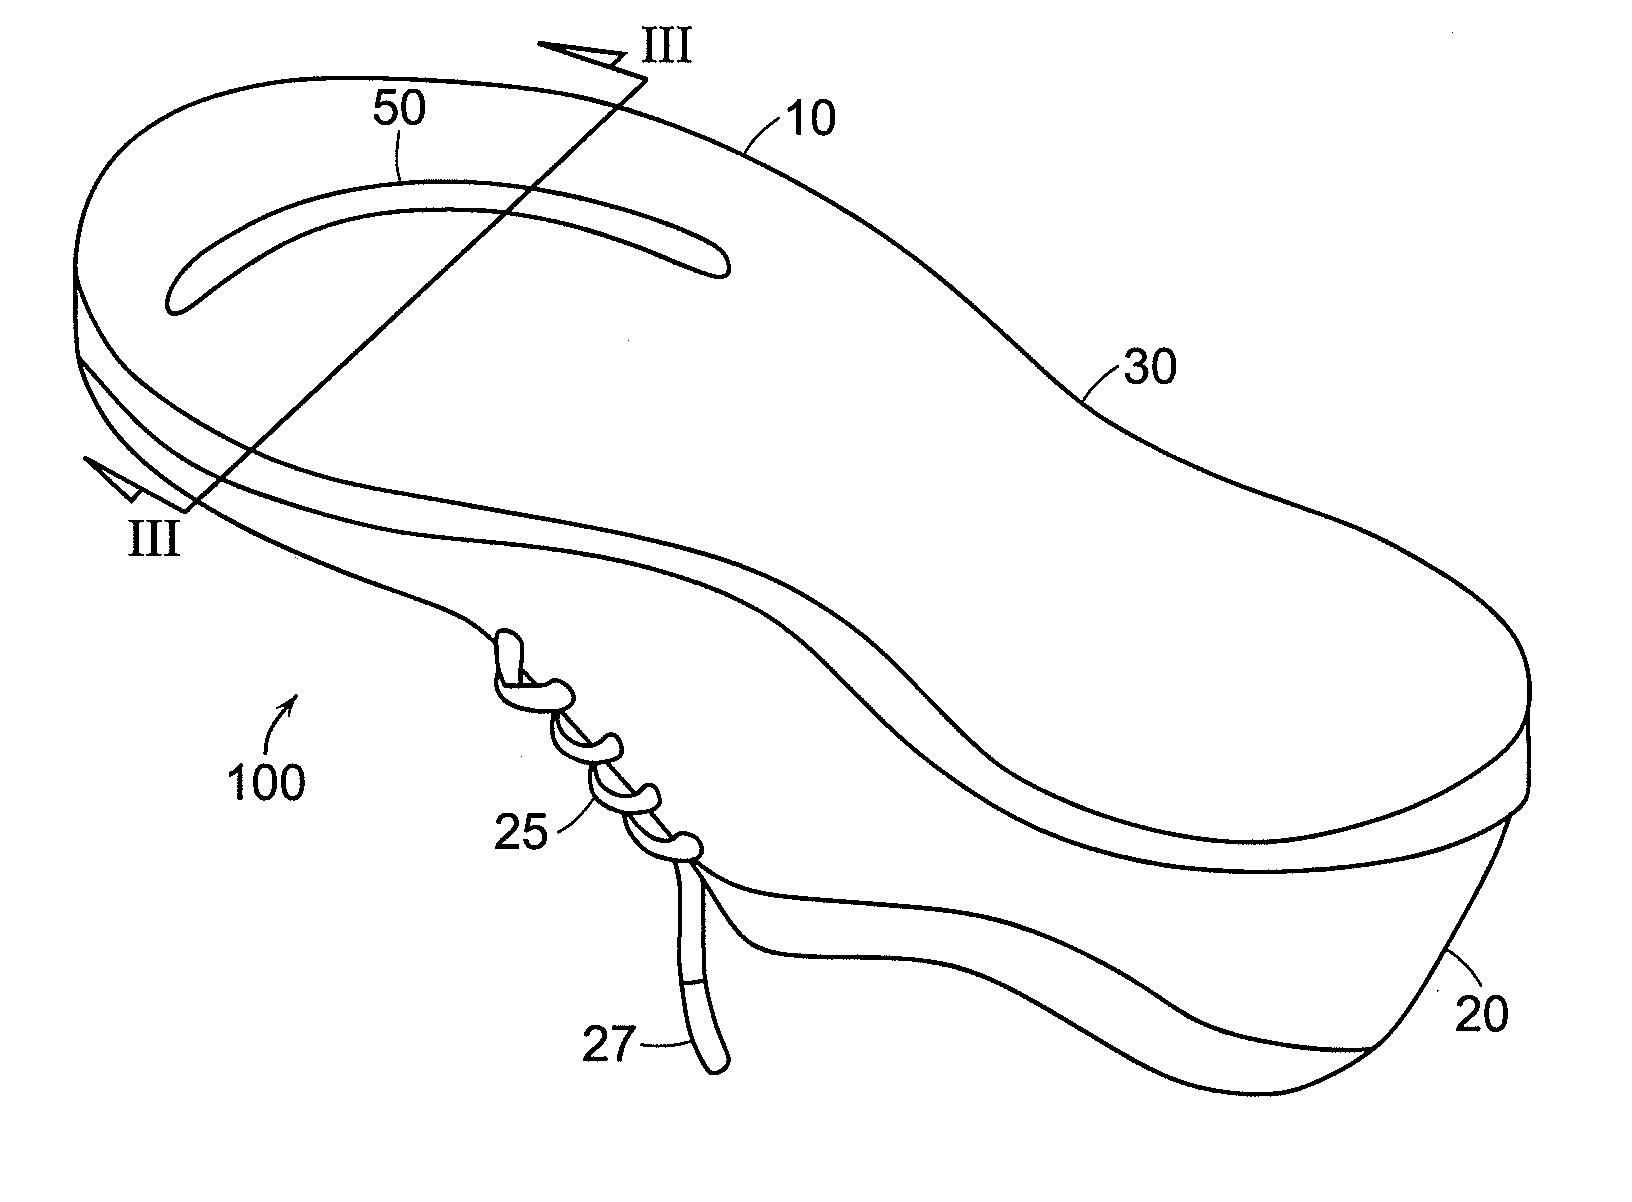 Flexible sole for an article of footwear